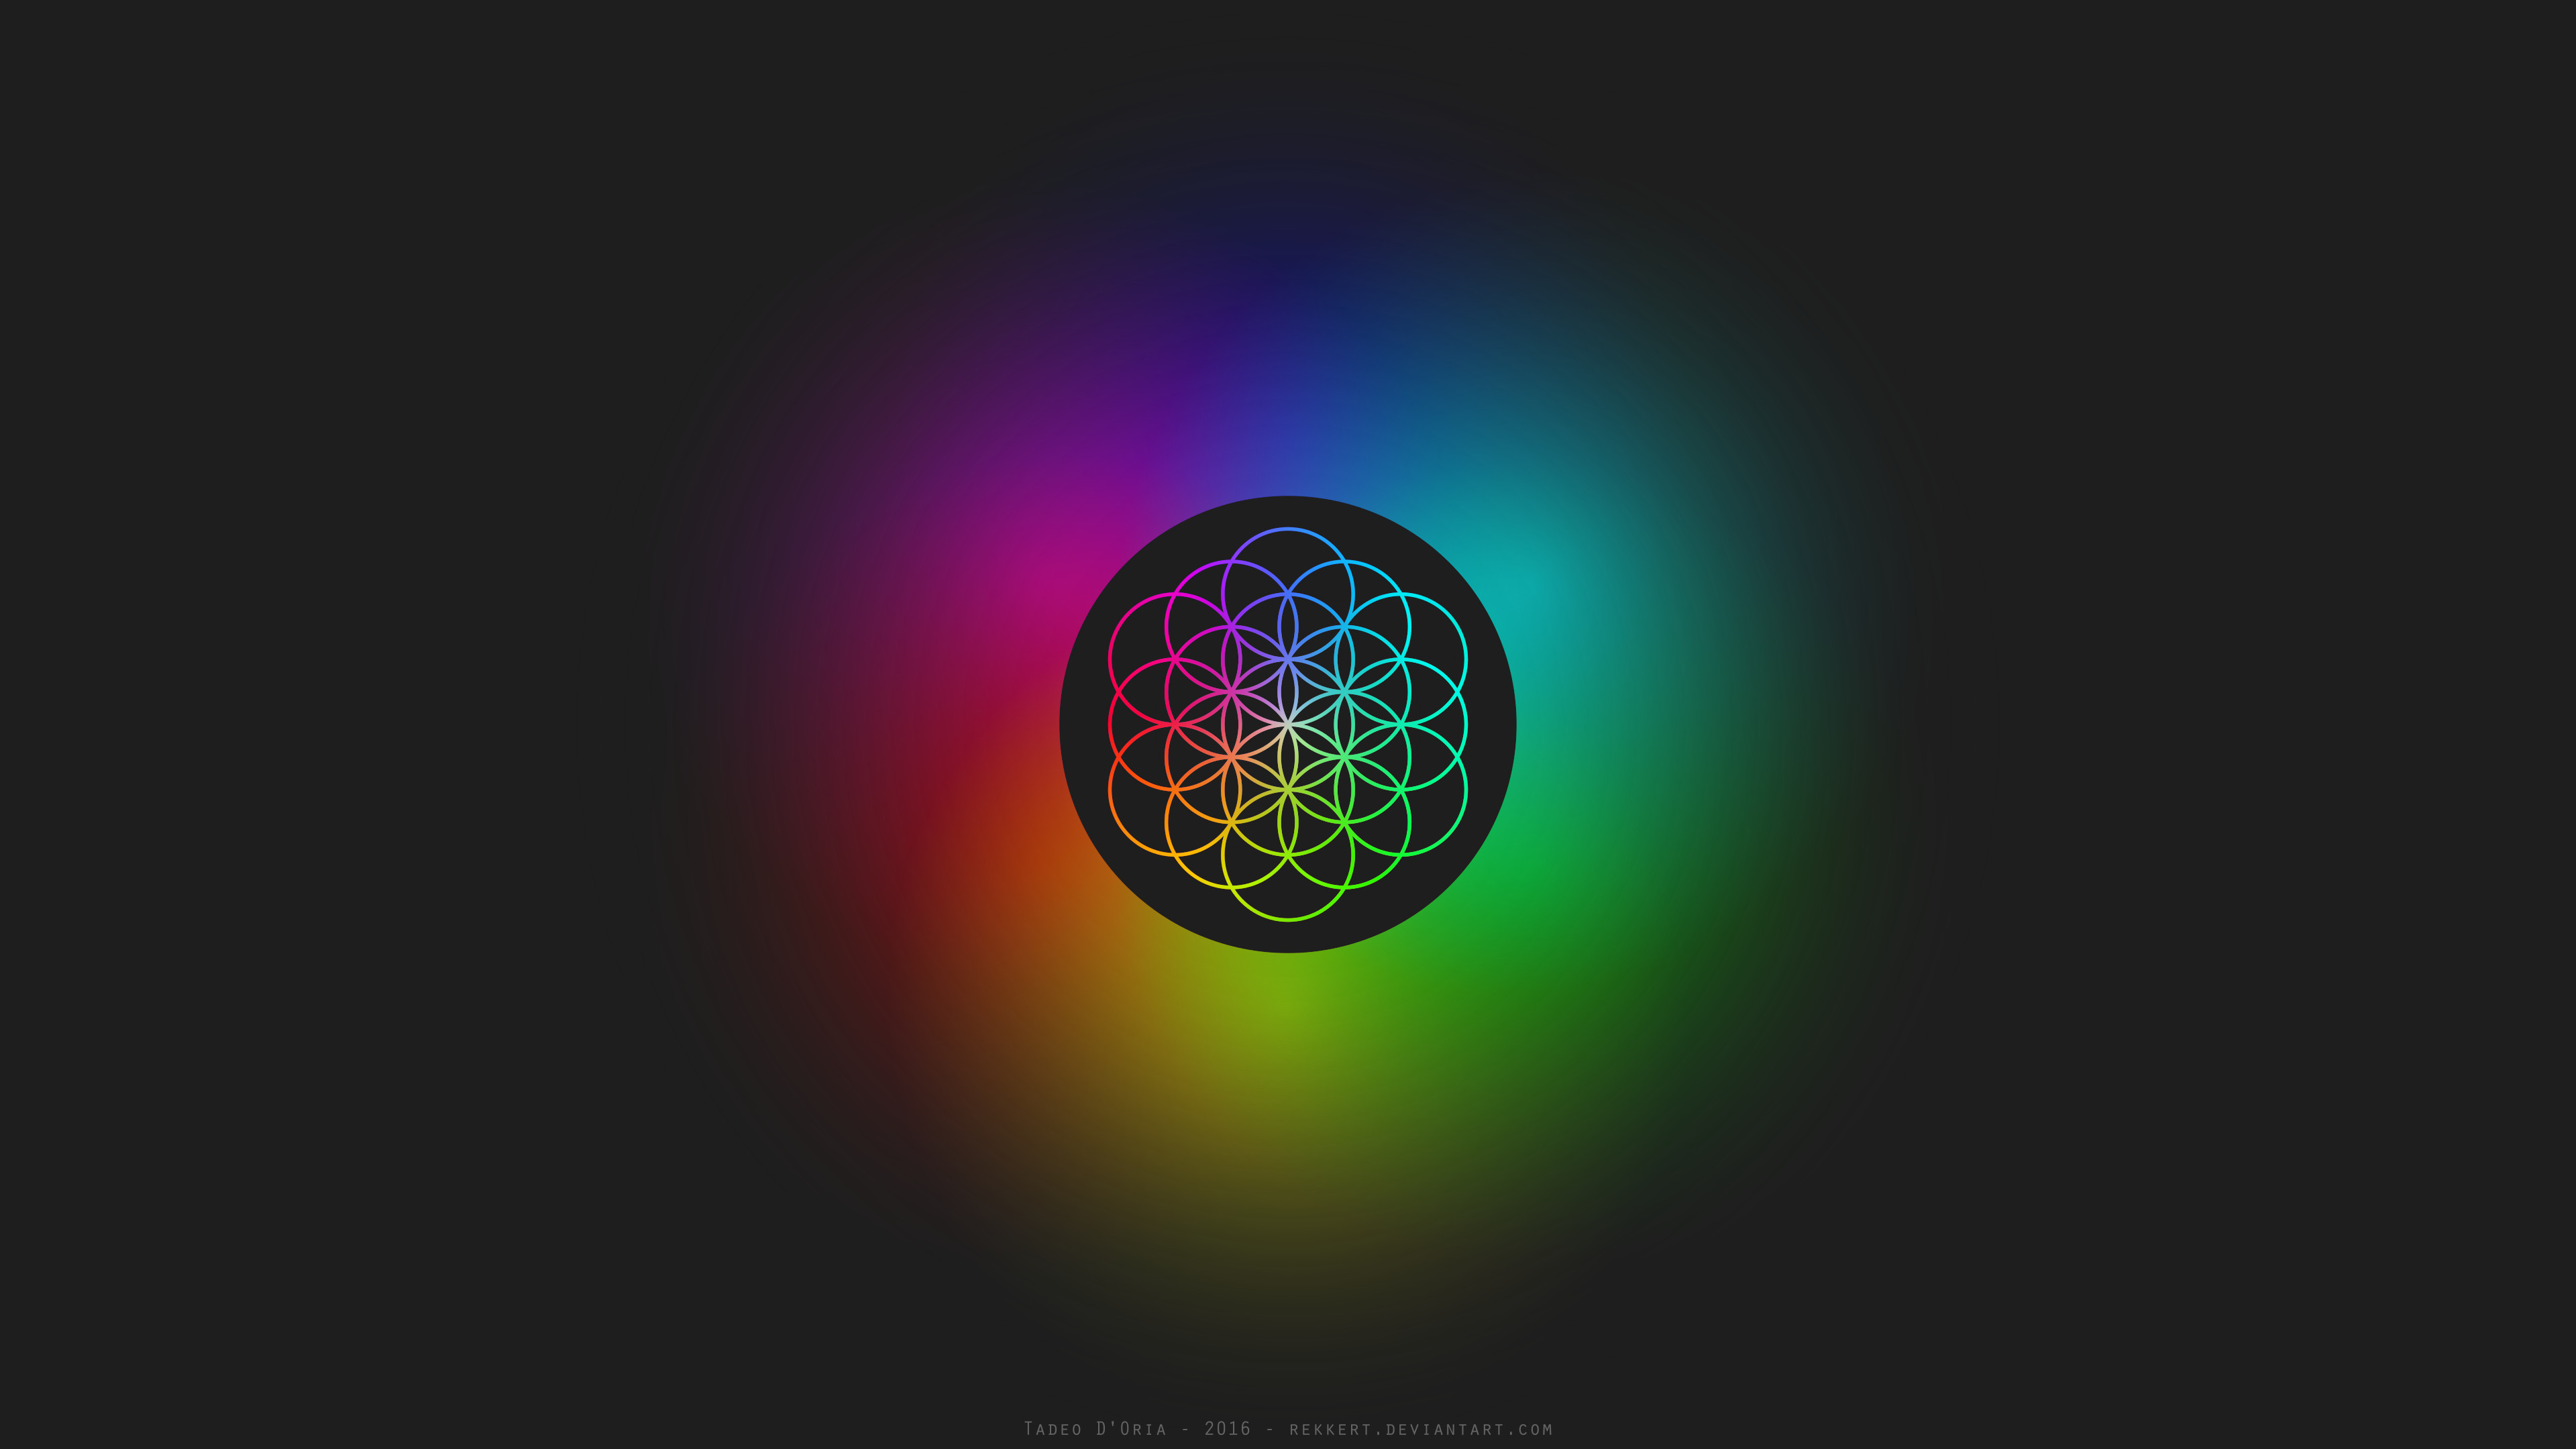 3840x2160 Coldplay iPhone wallpaper Coldplay Pinterest iPhone | HD Wallpapers |  Pinterest | Coldplay wallpaper, Hd wallpaper and Wallpaper